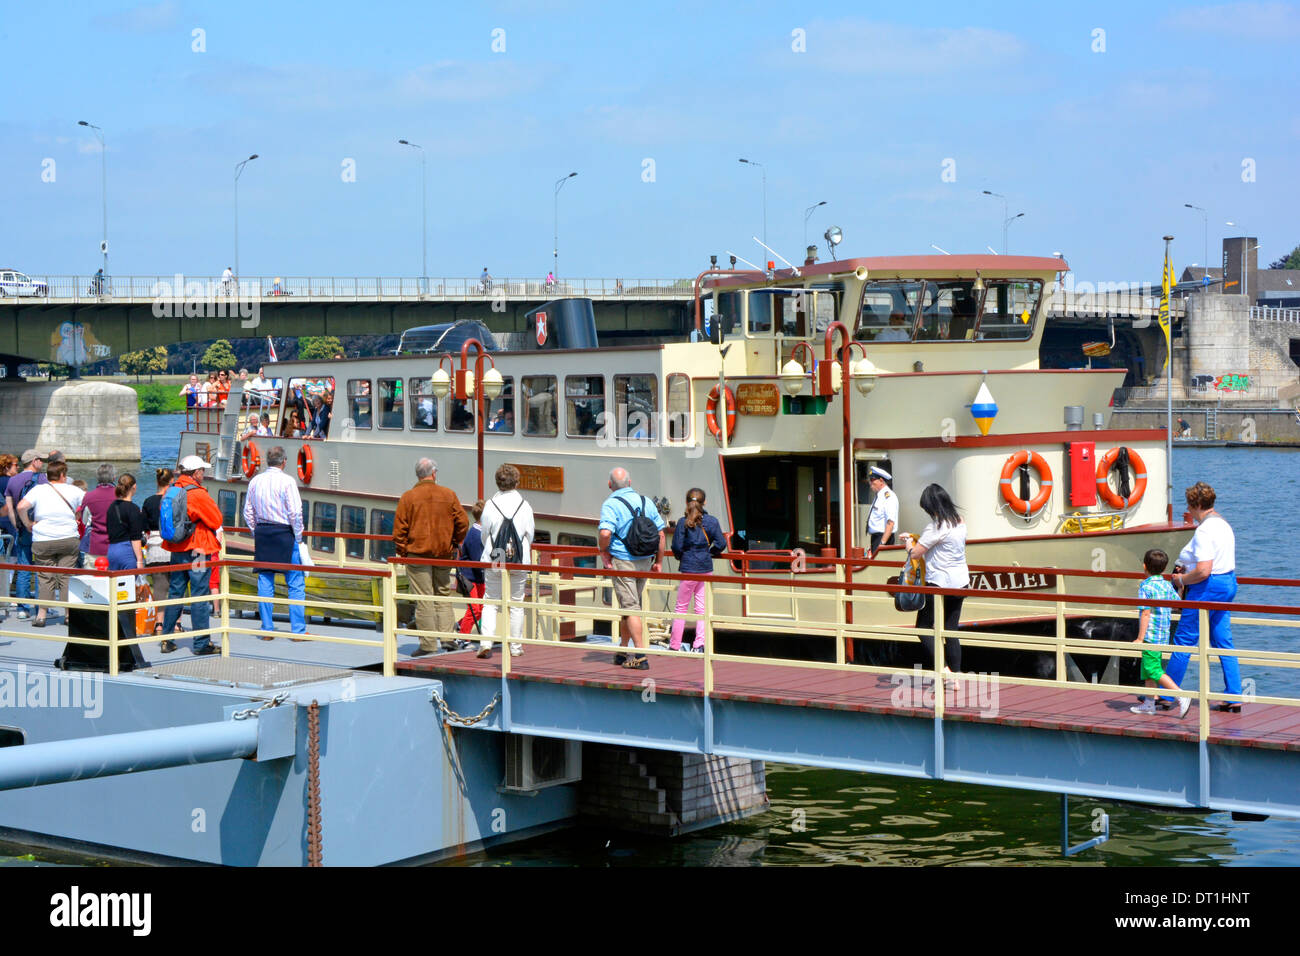 Maastricht City River Meuse sightseeing tour boat returns passengers to boarding planform next group people wait to board sunny summer   blue sky day Stock Photo